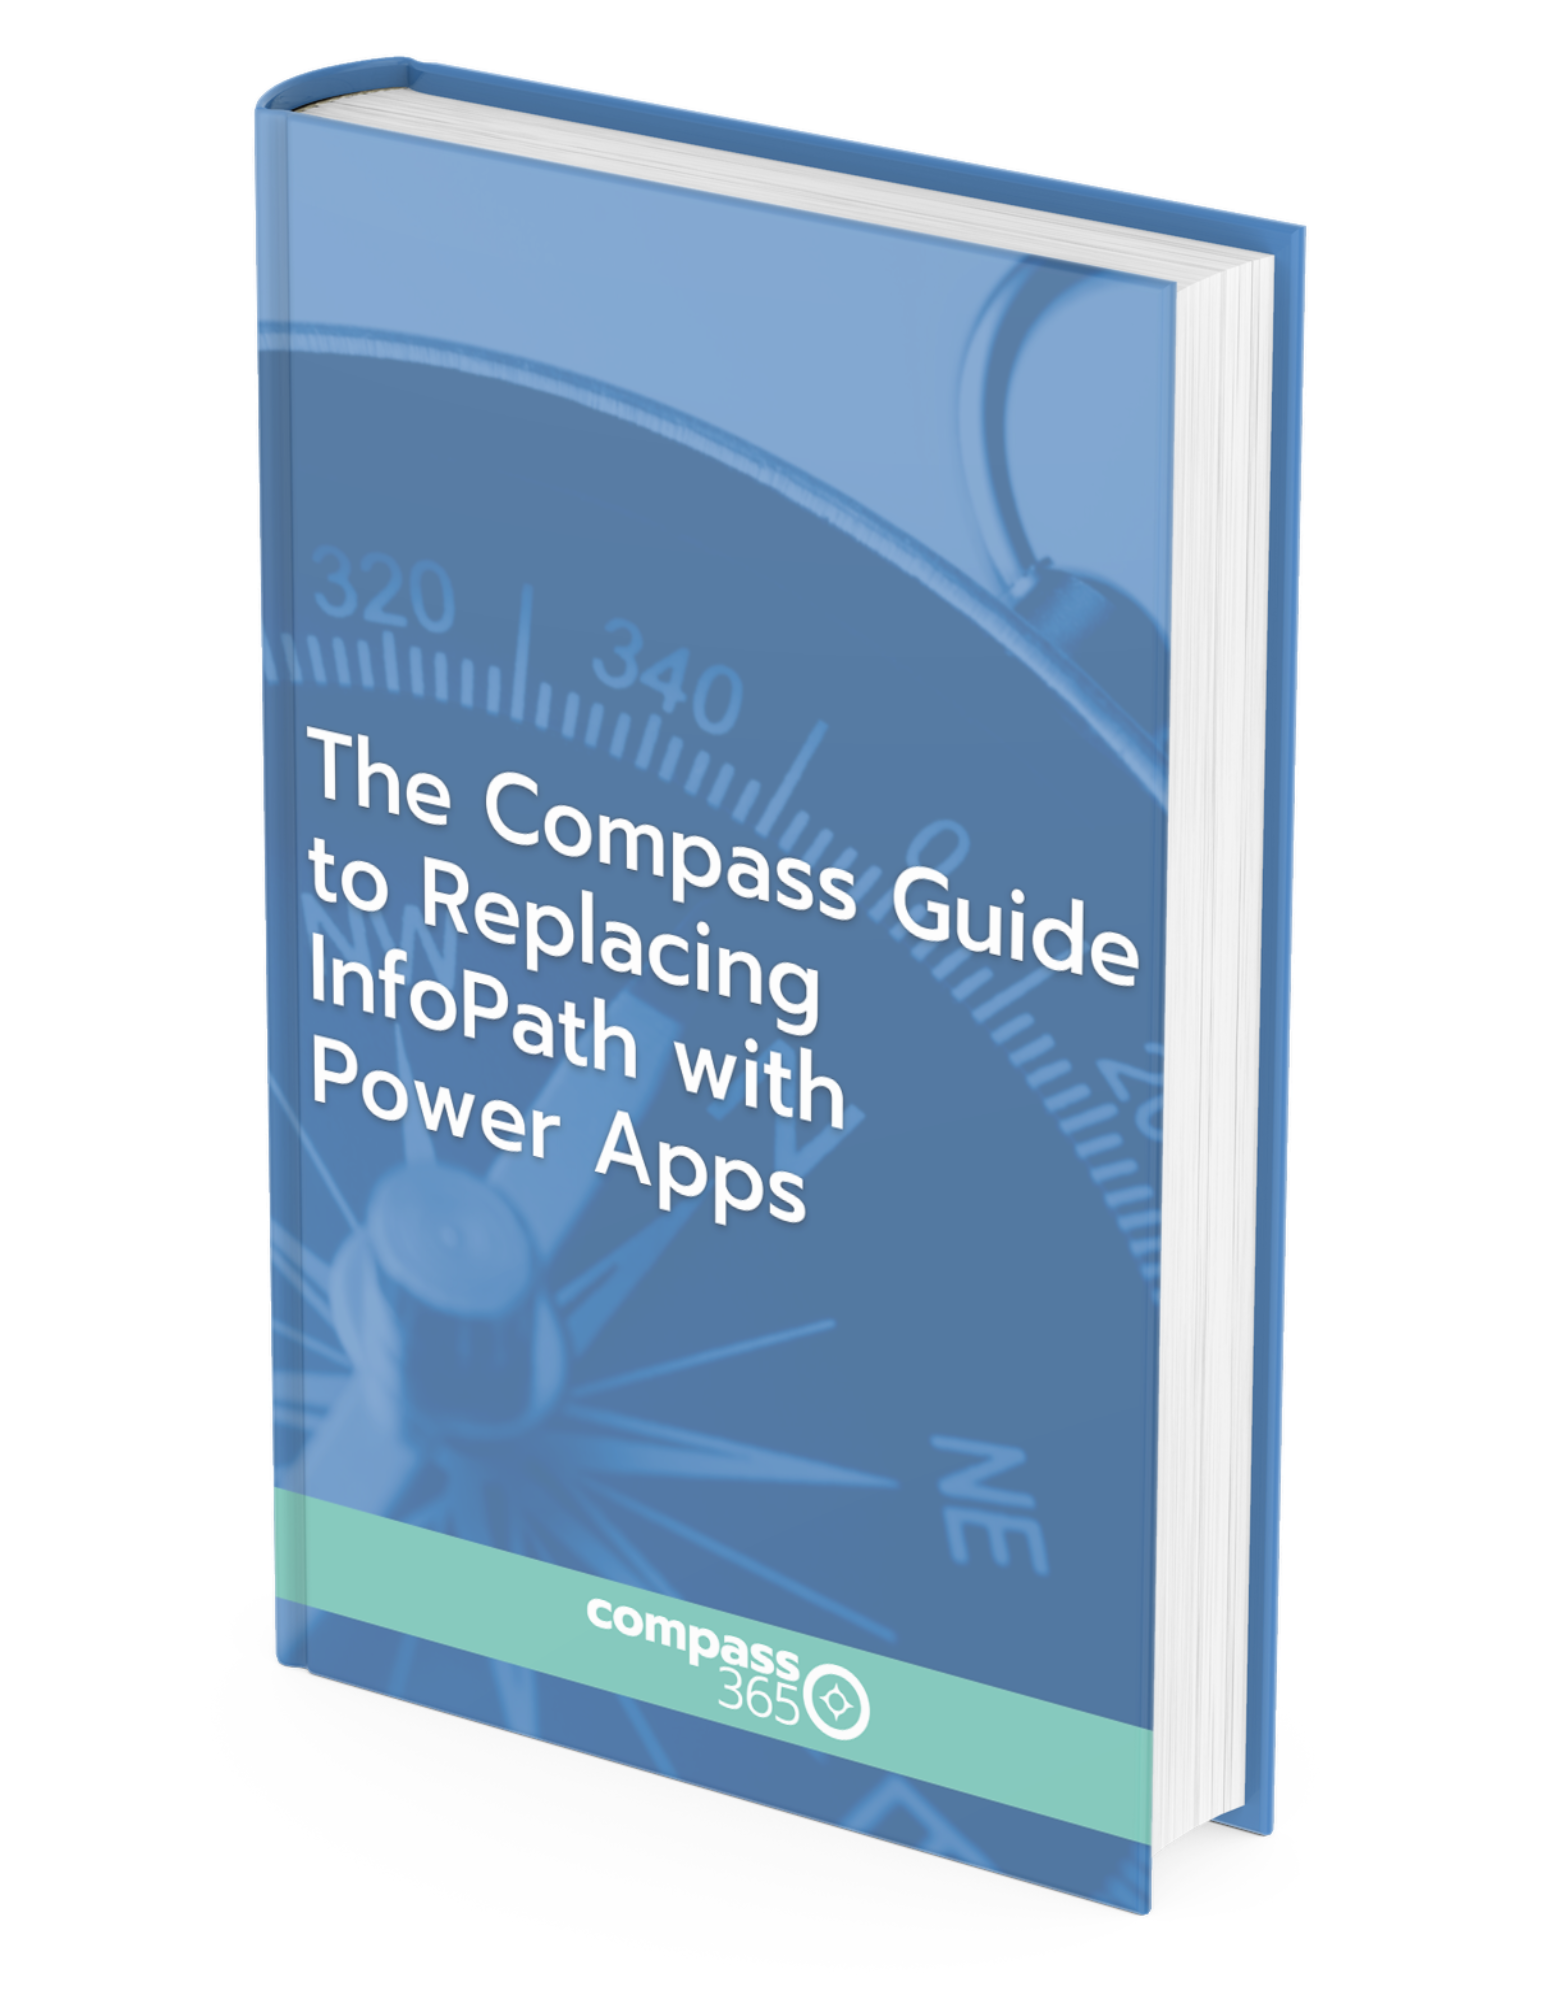 The Compass Guide to Replacing InfoPath with Power Apps